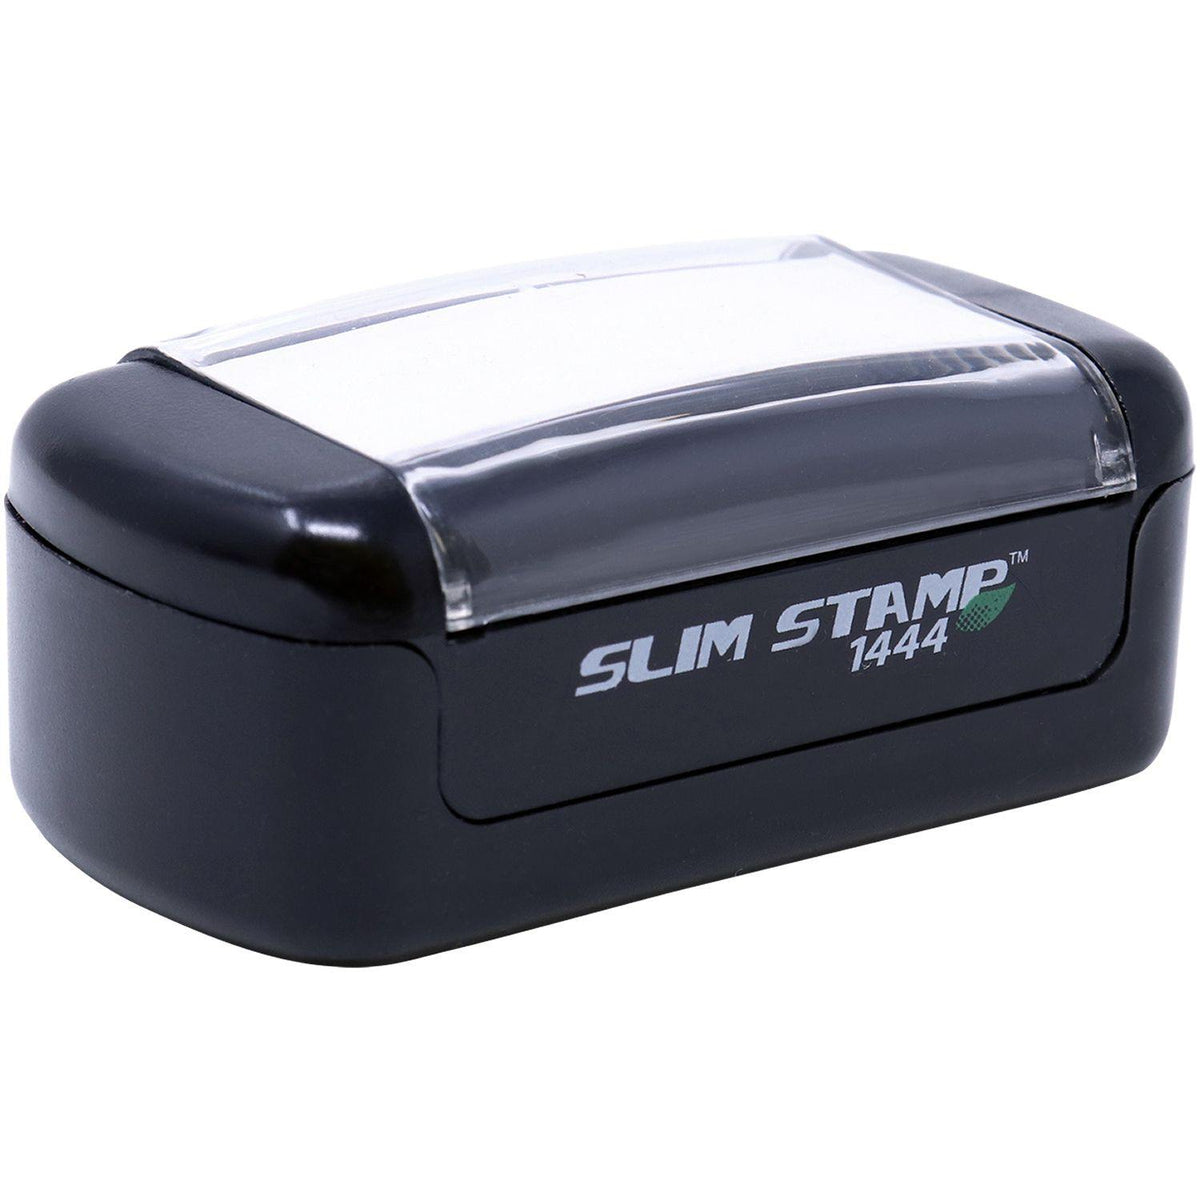 Alt View of Slim Pre-Inked Great Improvement Stamp Mount Angle